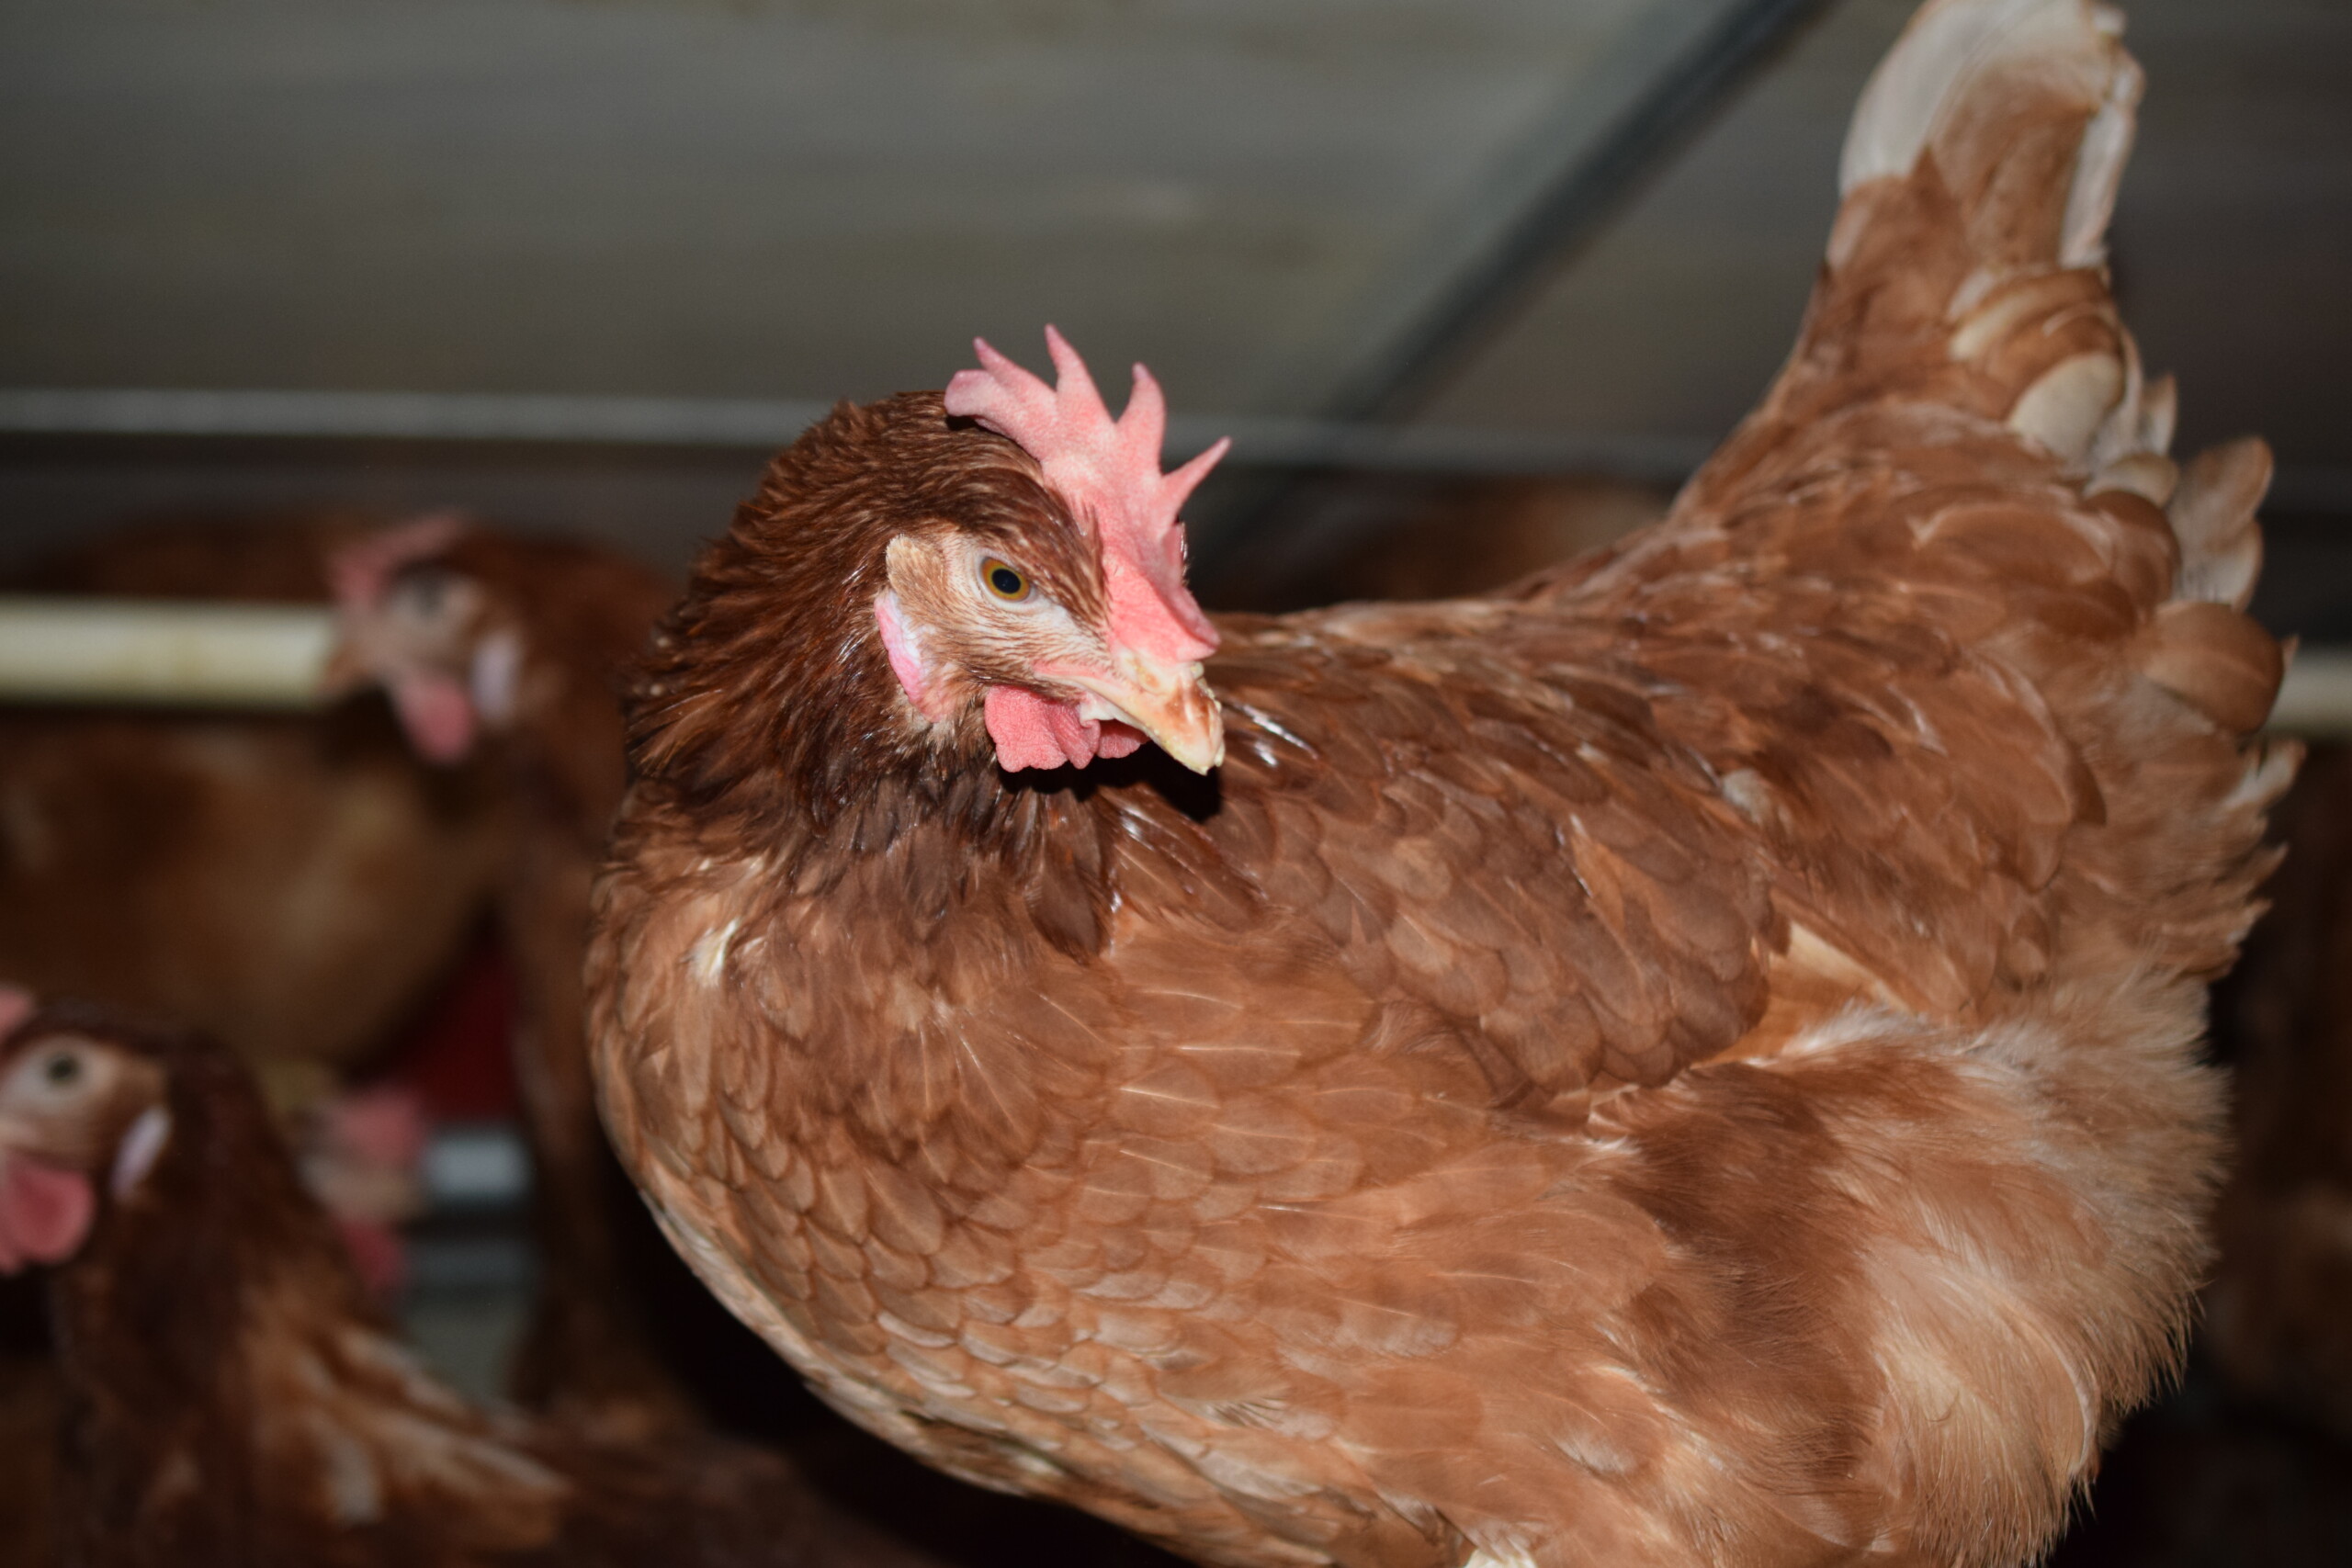 Valley Fresh Foods Animal Care certifications are some of the best in the egg industry